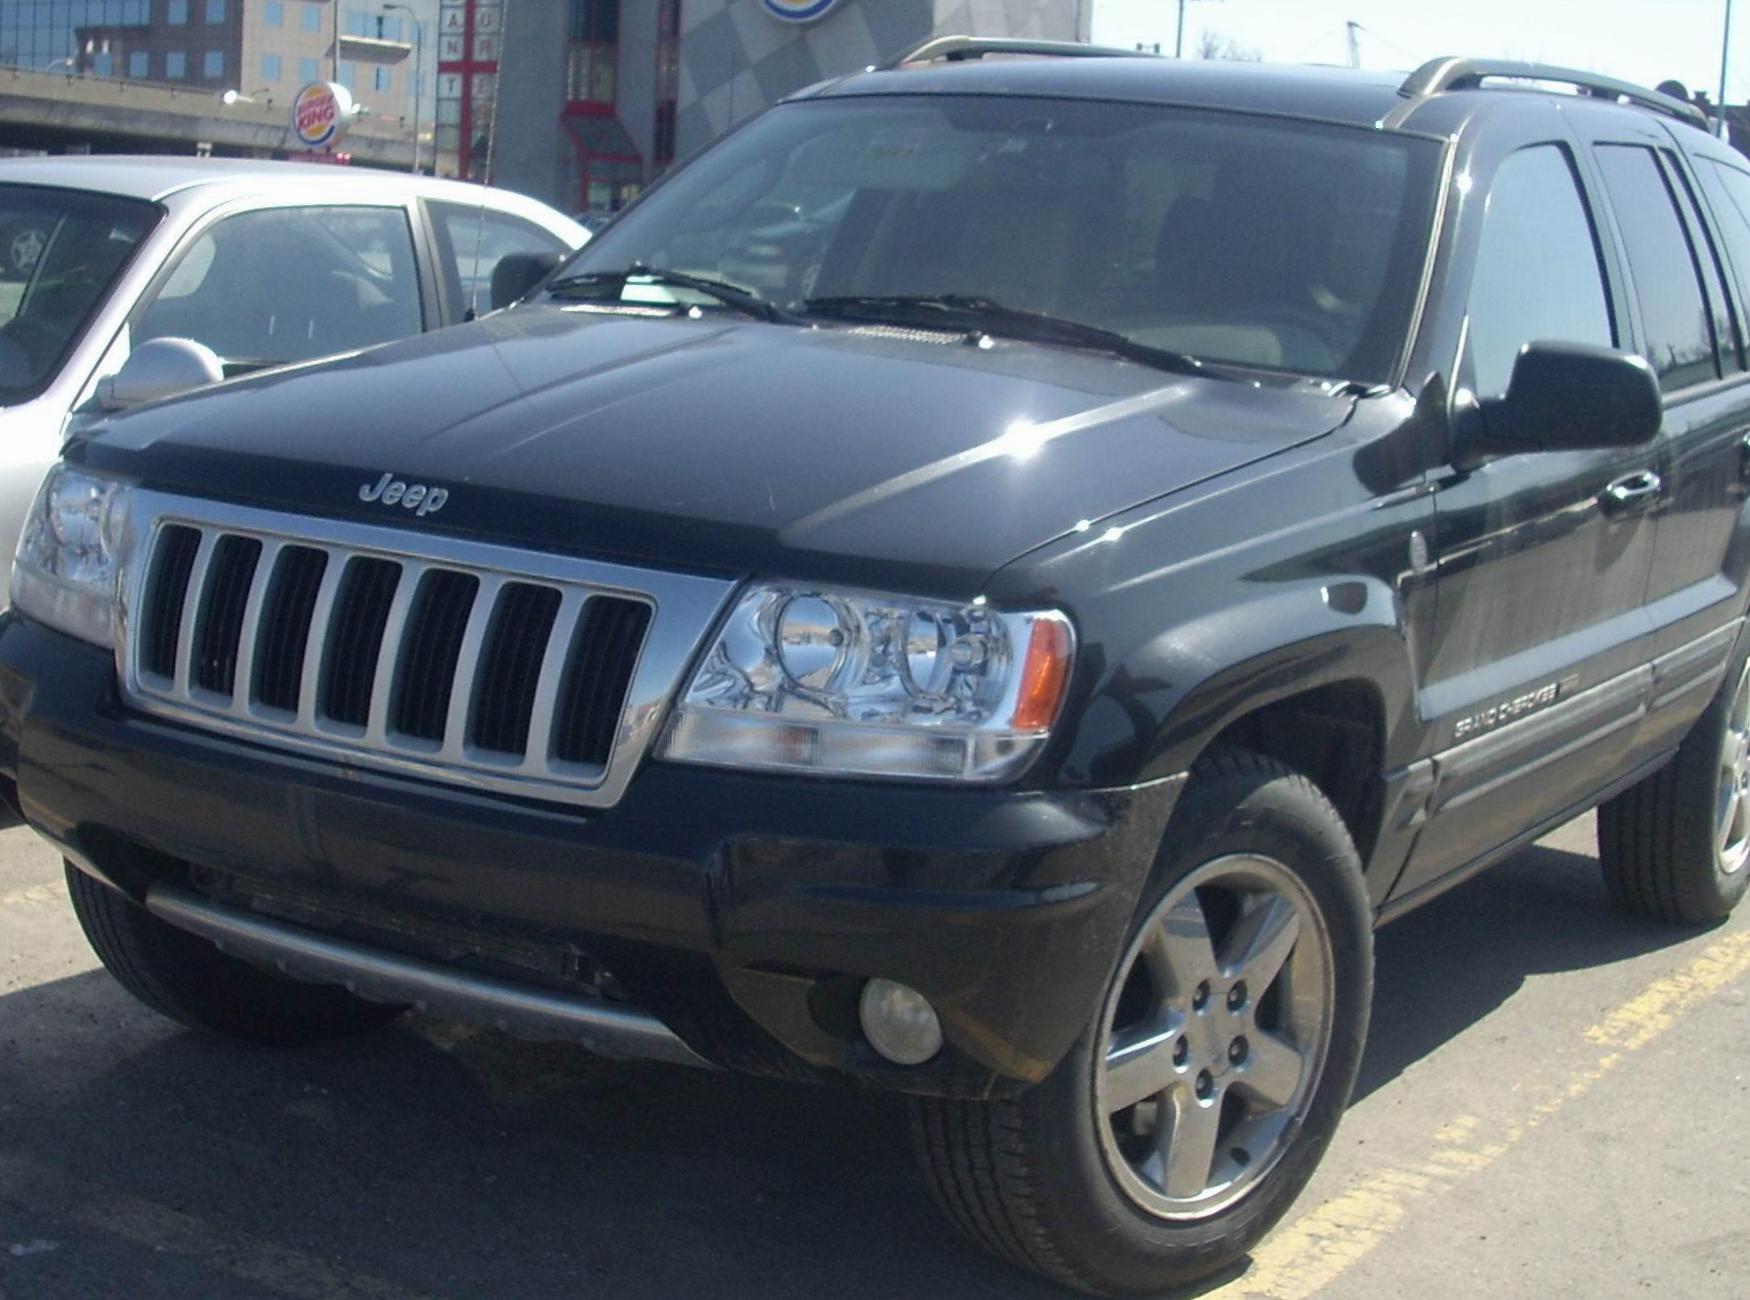 Grand Cherokee Jeep approved 2011